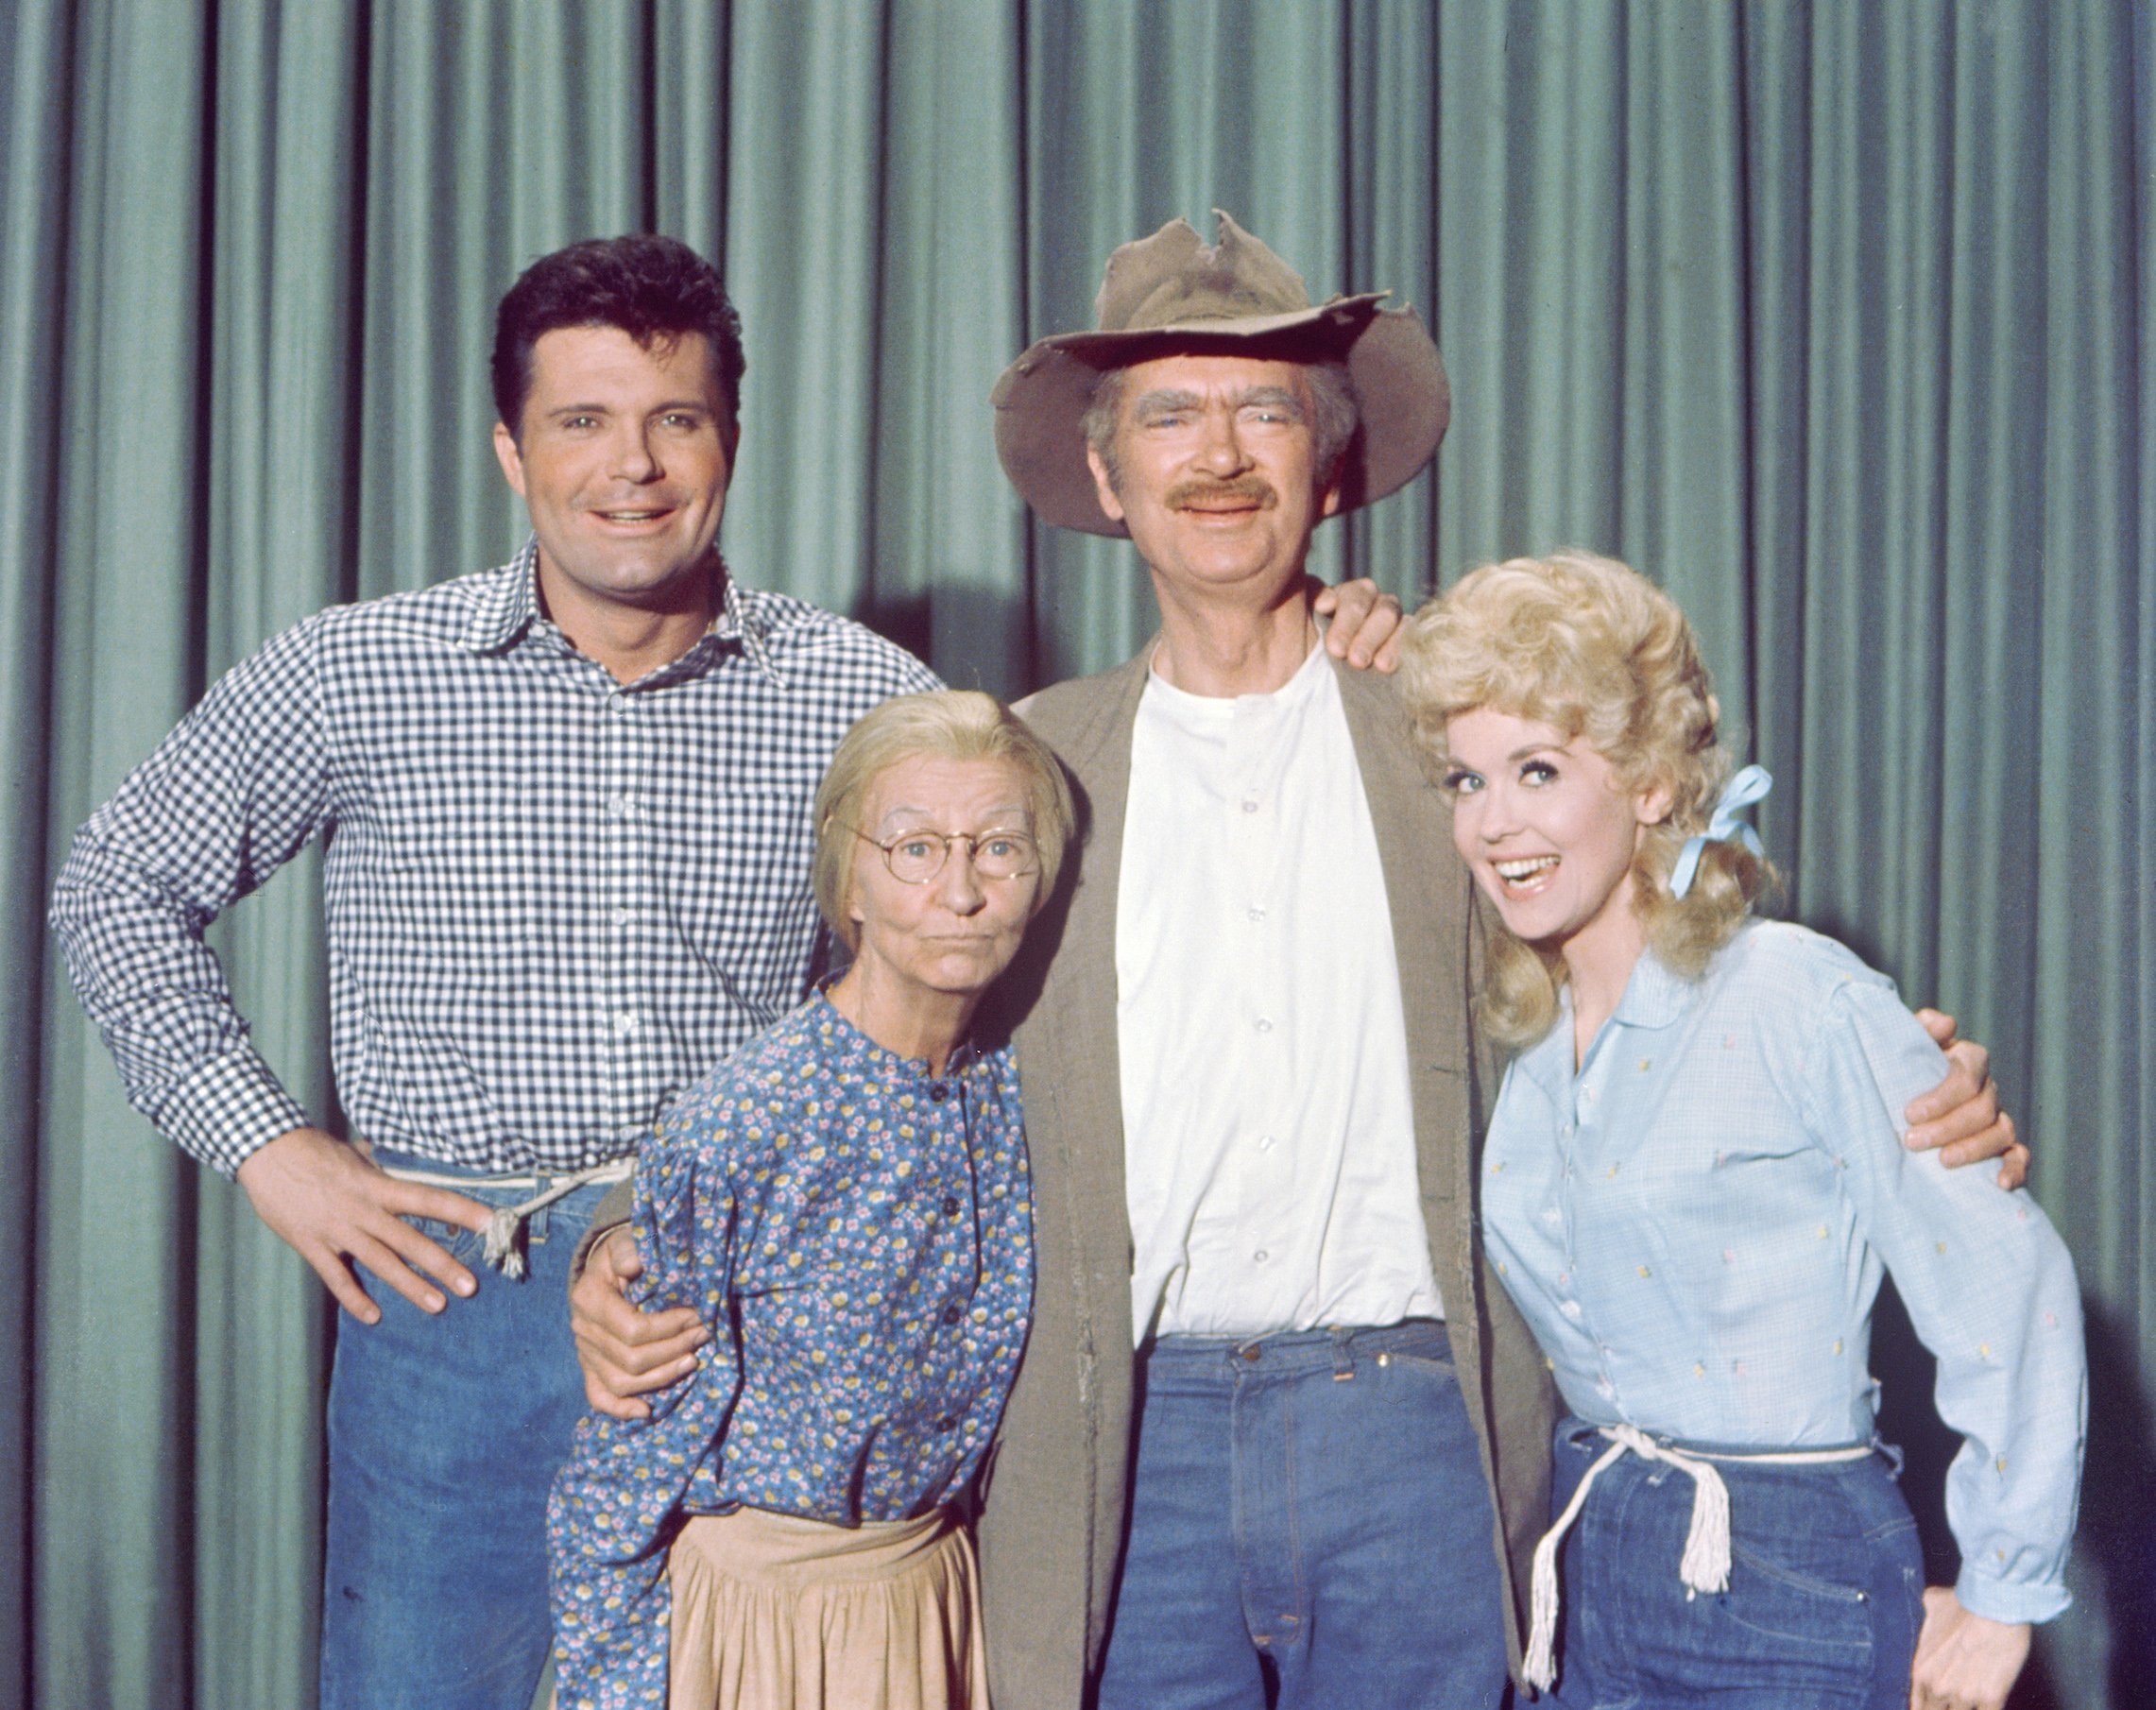 Max Baer, Jr. (as Jethro Bodine); Irene Ryan (as Granny, Daisy Moses);  Buddy Ebsen (as Jed Clampett); and Donna Douglas (as Elly May Clampett) from 'The Beverly Hillbillies'